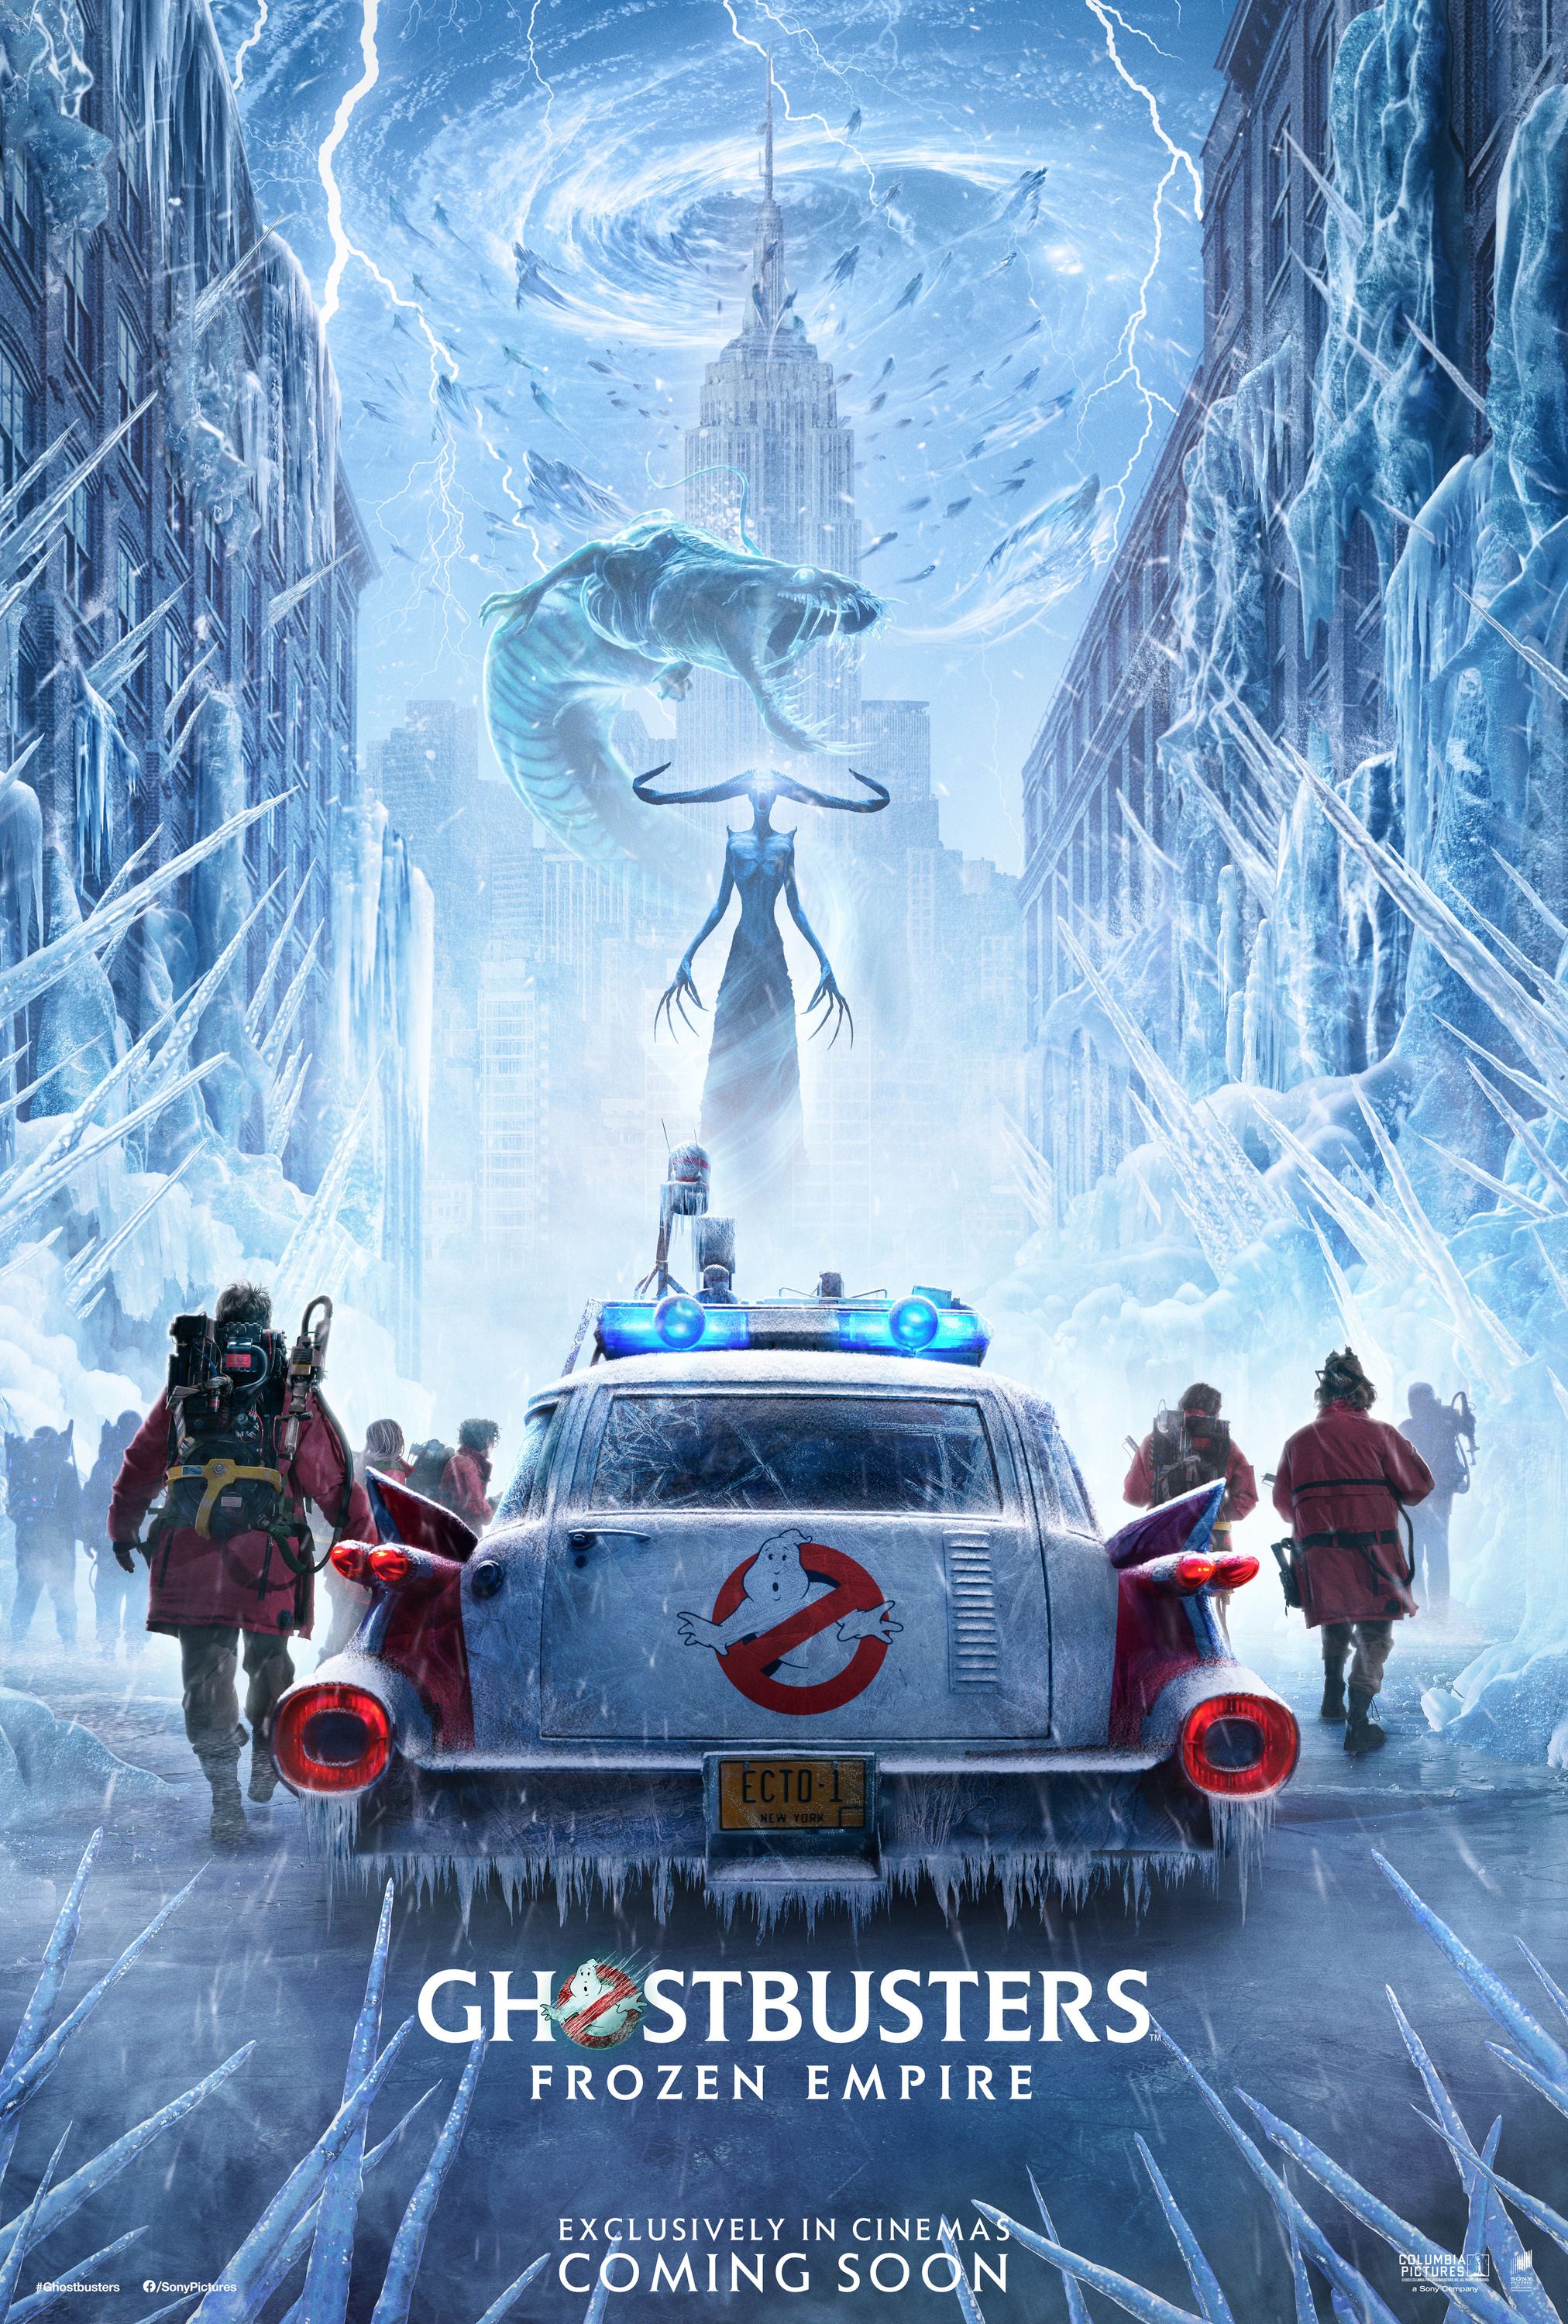 'Ghostbusters Frozen Empire' Image — Bill Murray and Ernie Hudson Suit Up